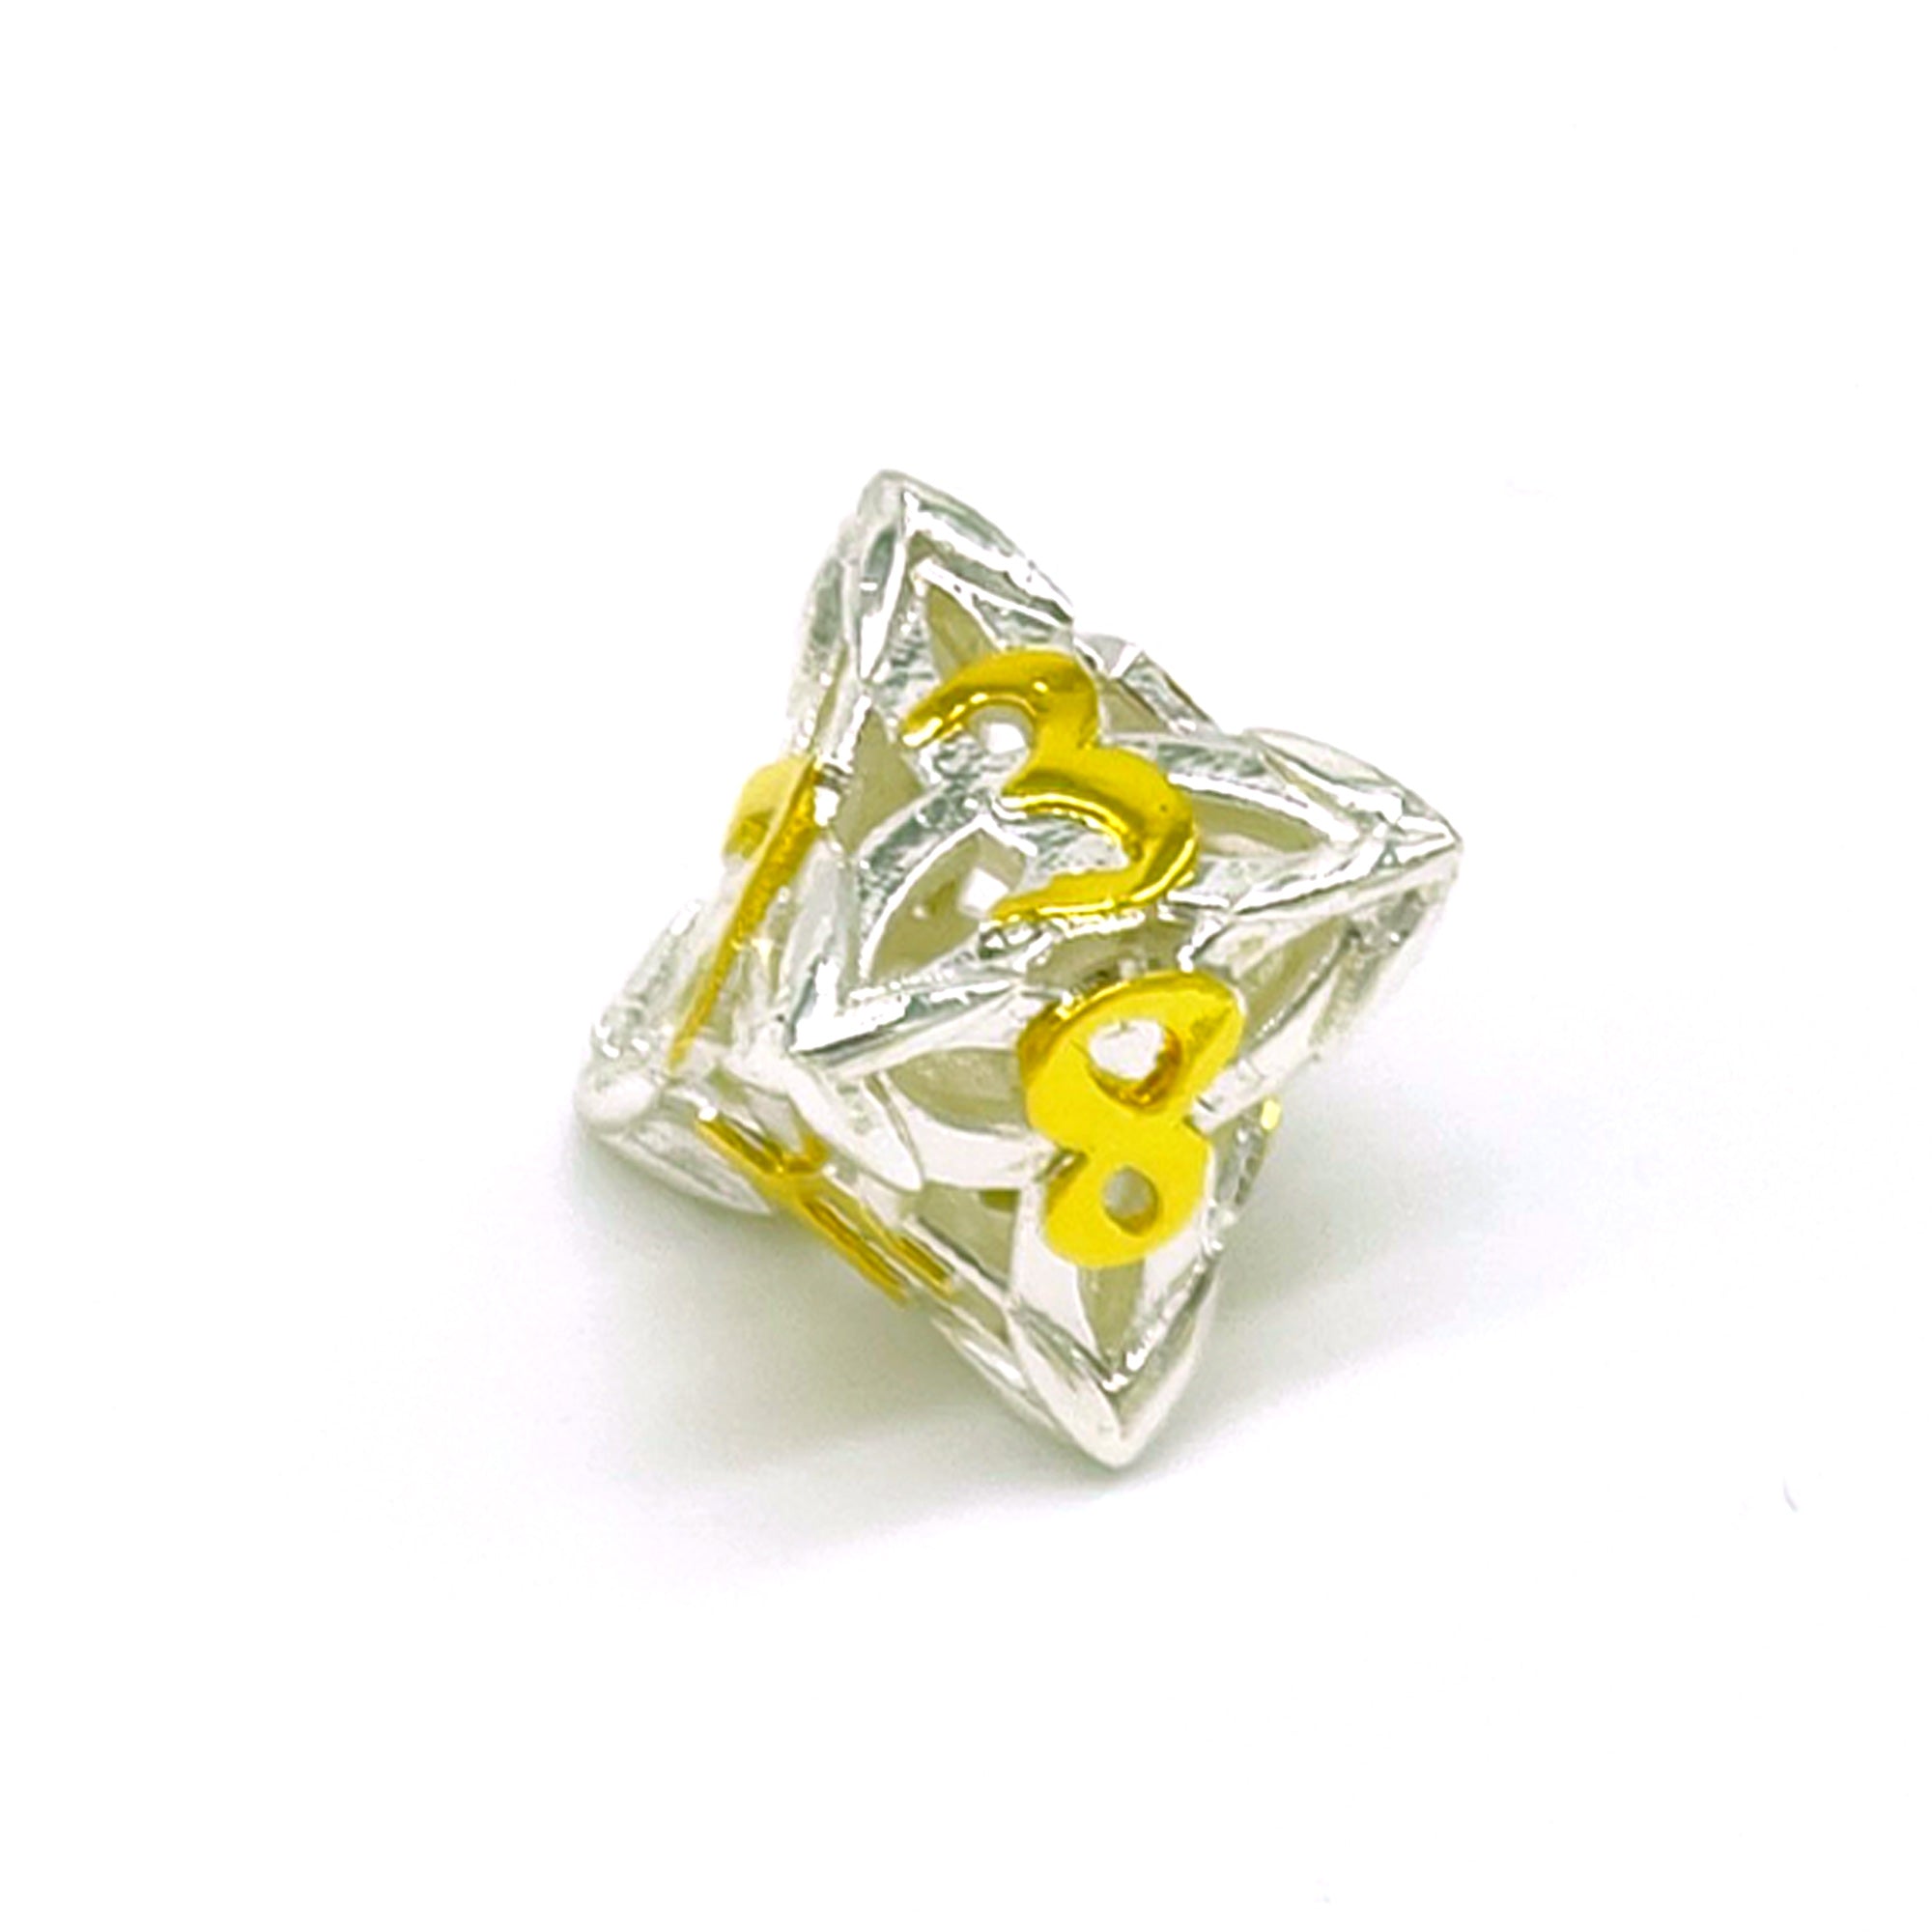 Celtic Knot Silver and Gold Metal 7pc Dice Set | Rollacrit